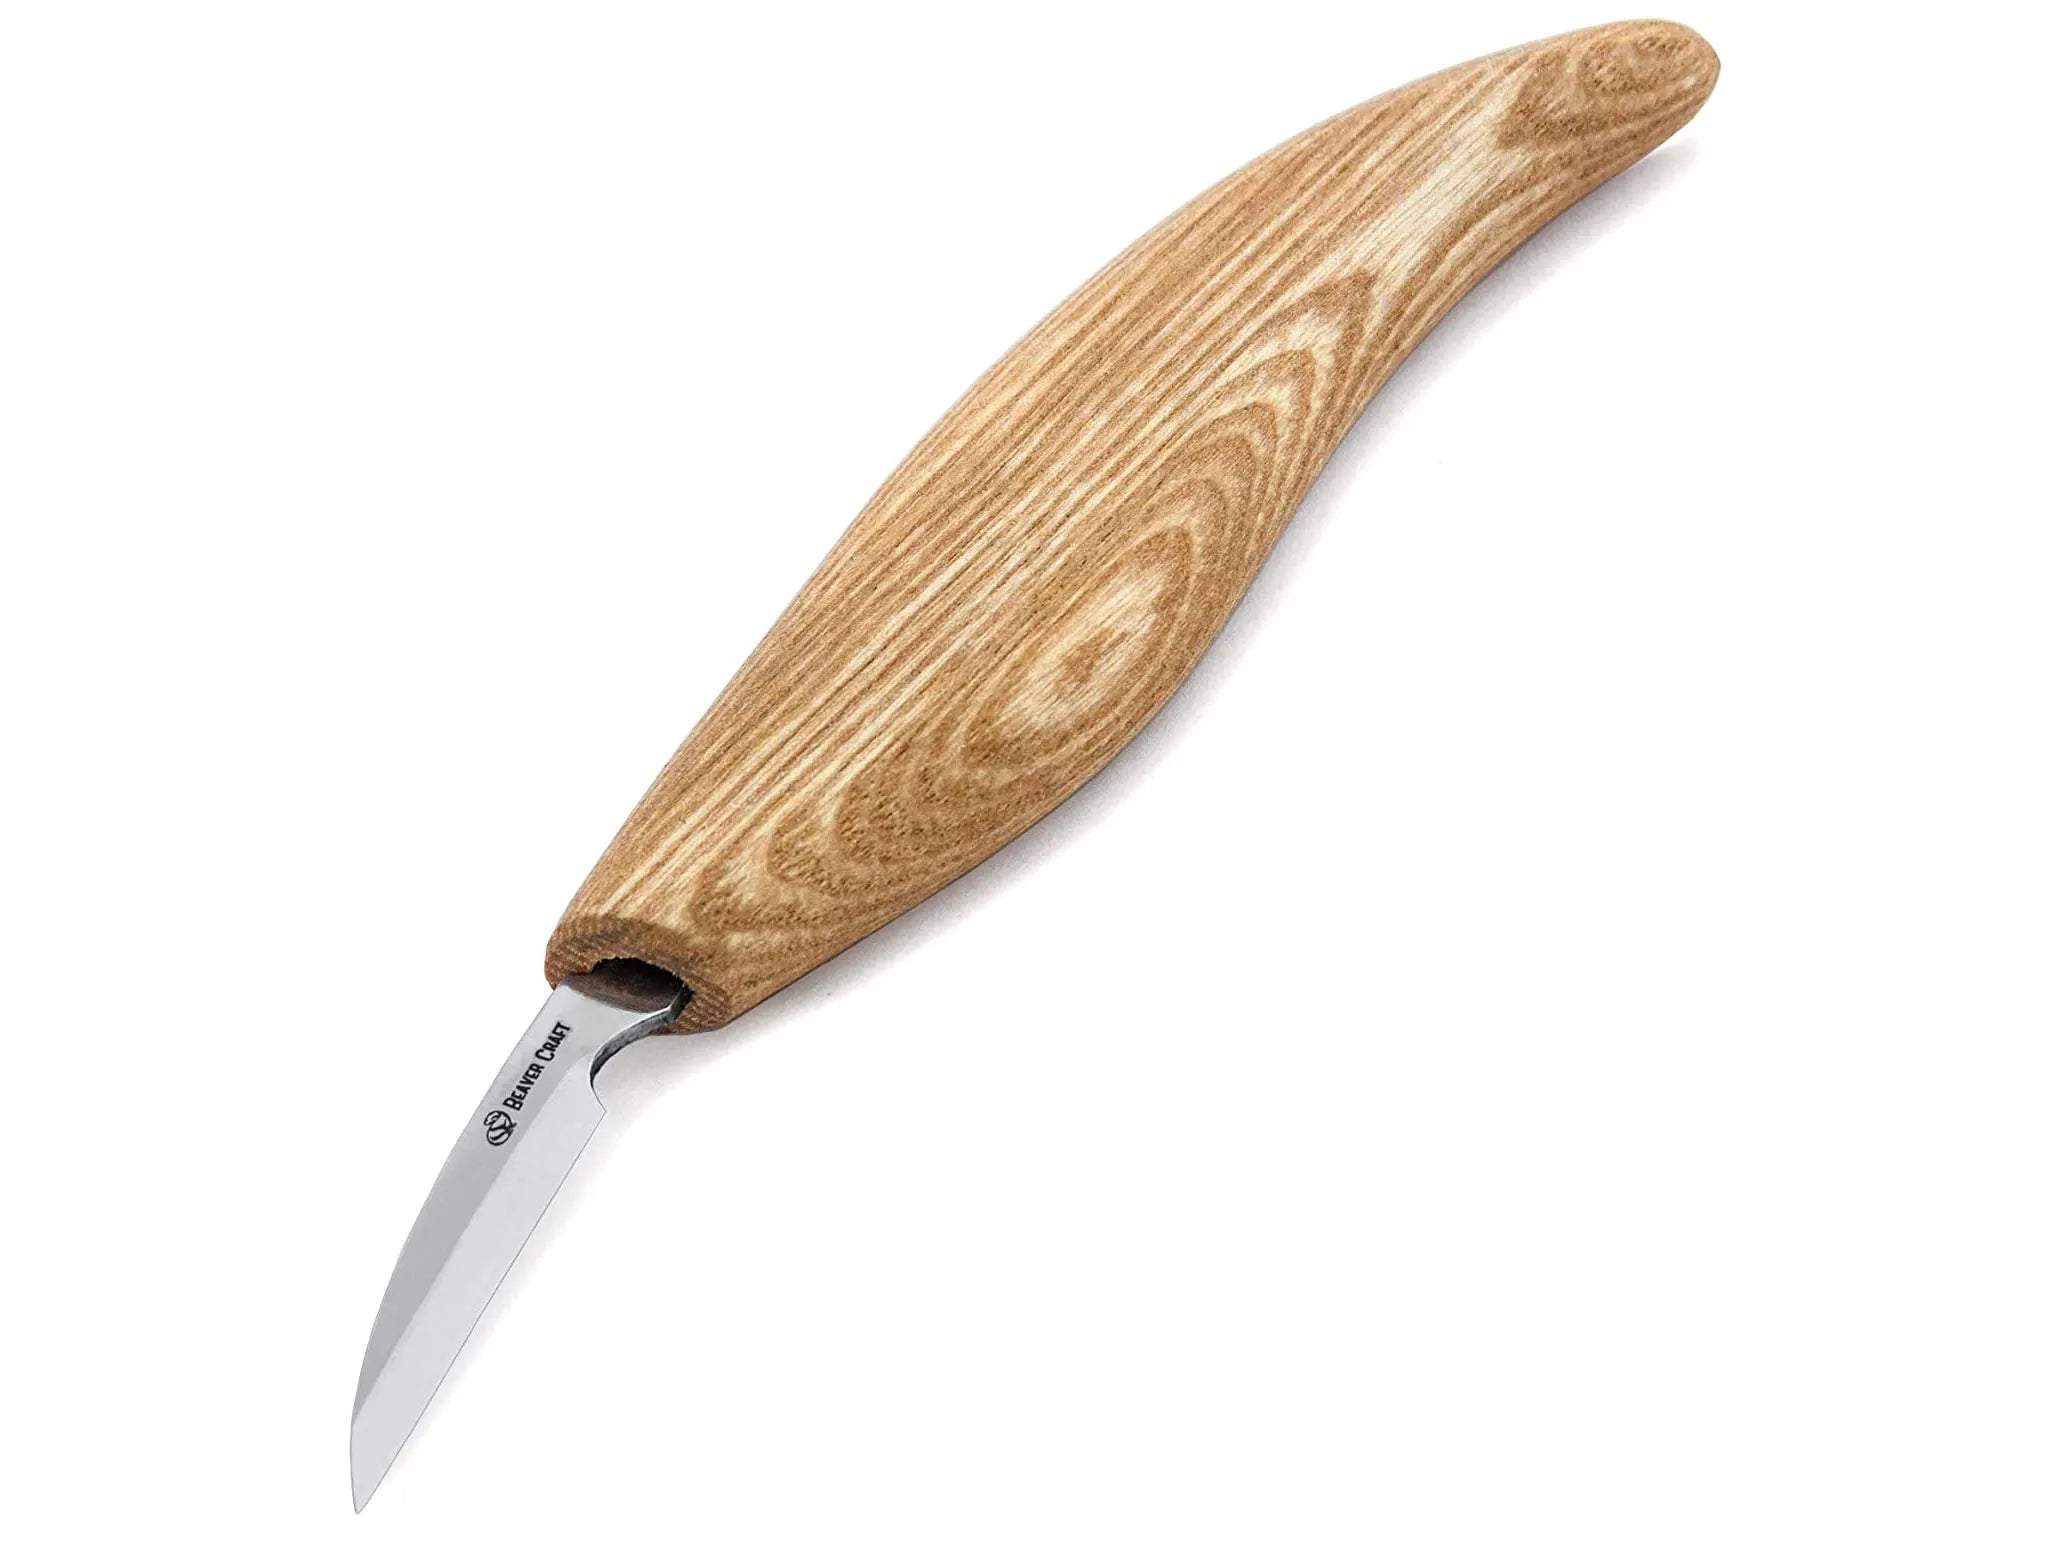 Cutting Carving Knife